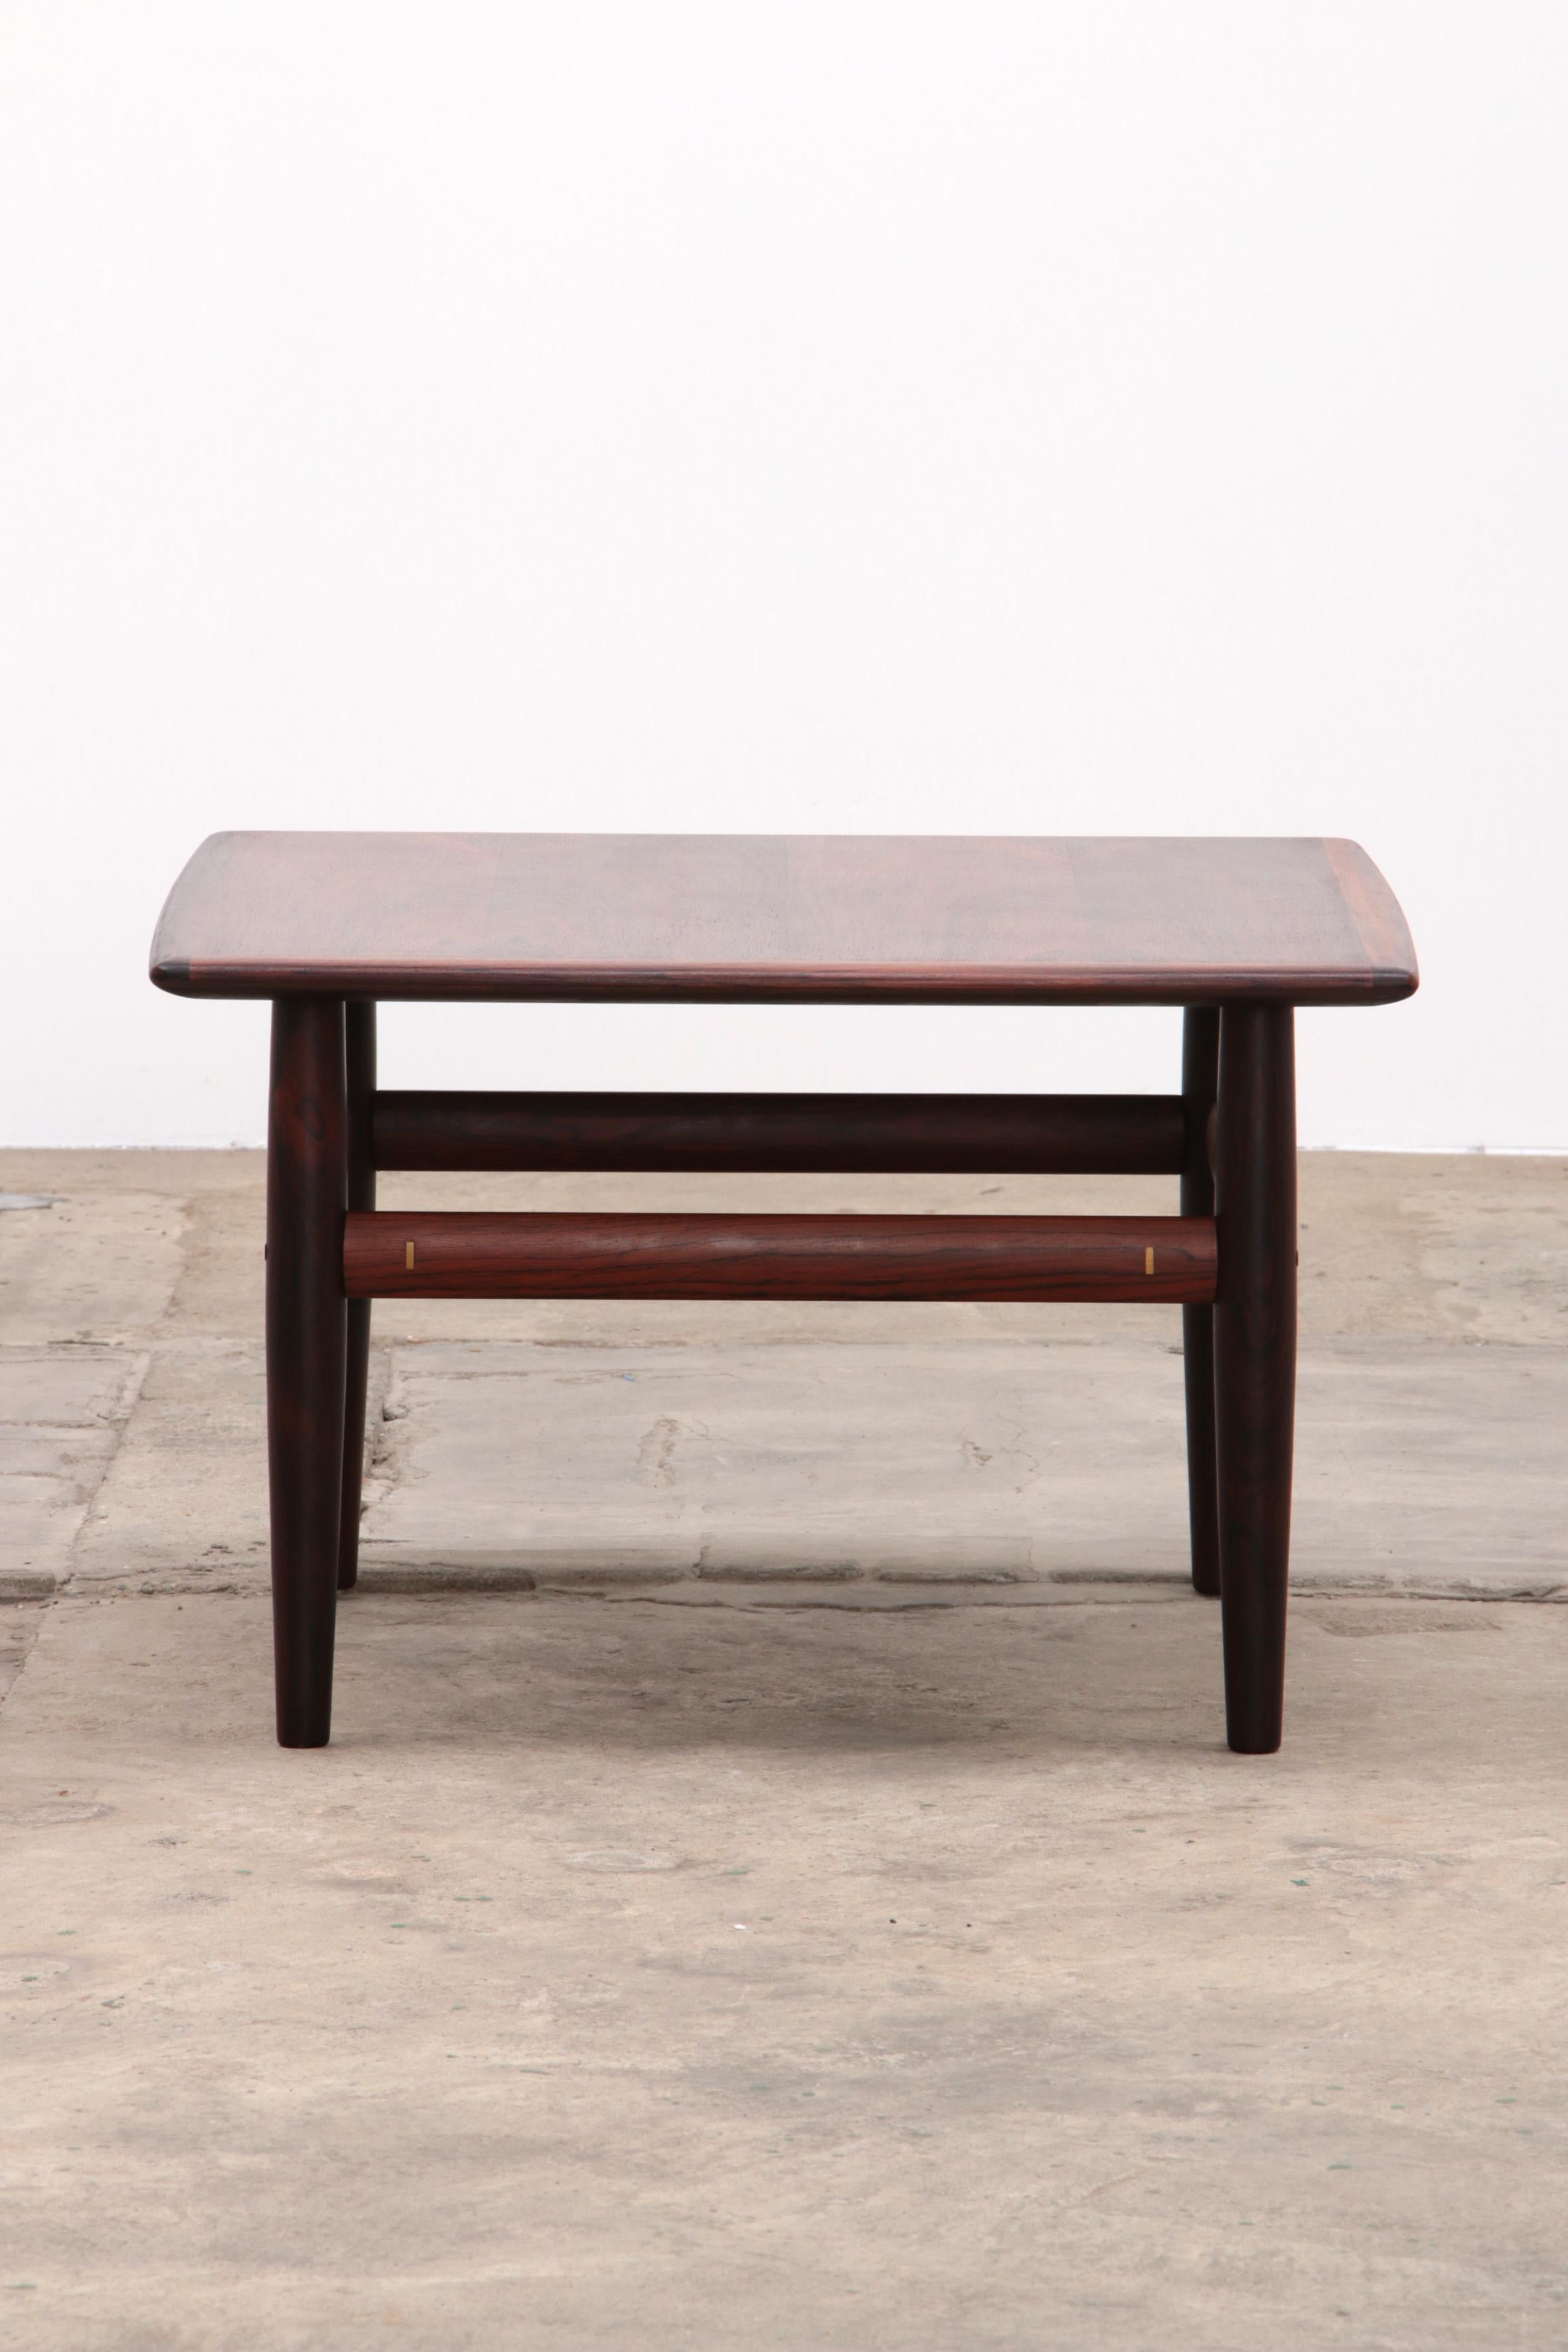 Mid-Century Modern Rosewood Coffee Table by Grete Jalk for Glostrup, 1968 Denmark. For Sale